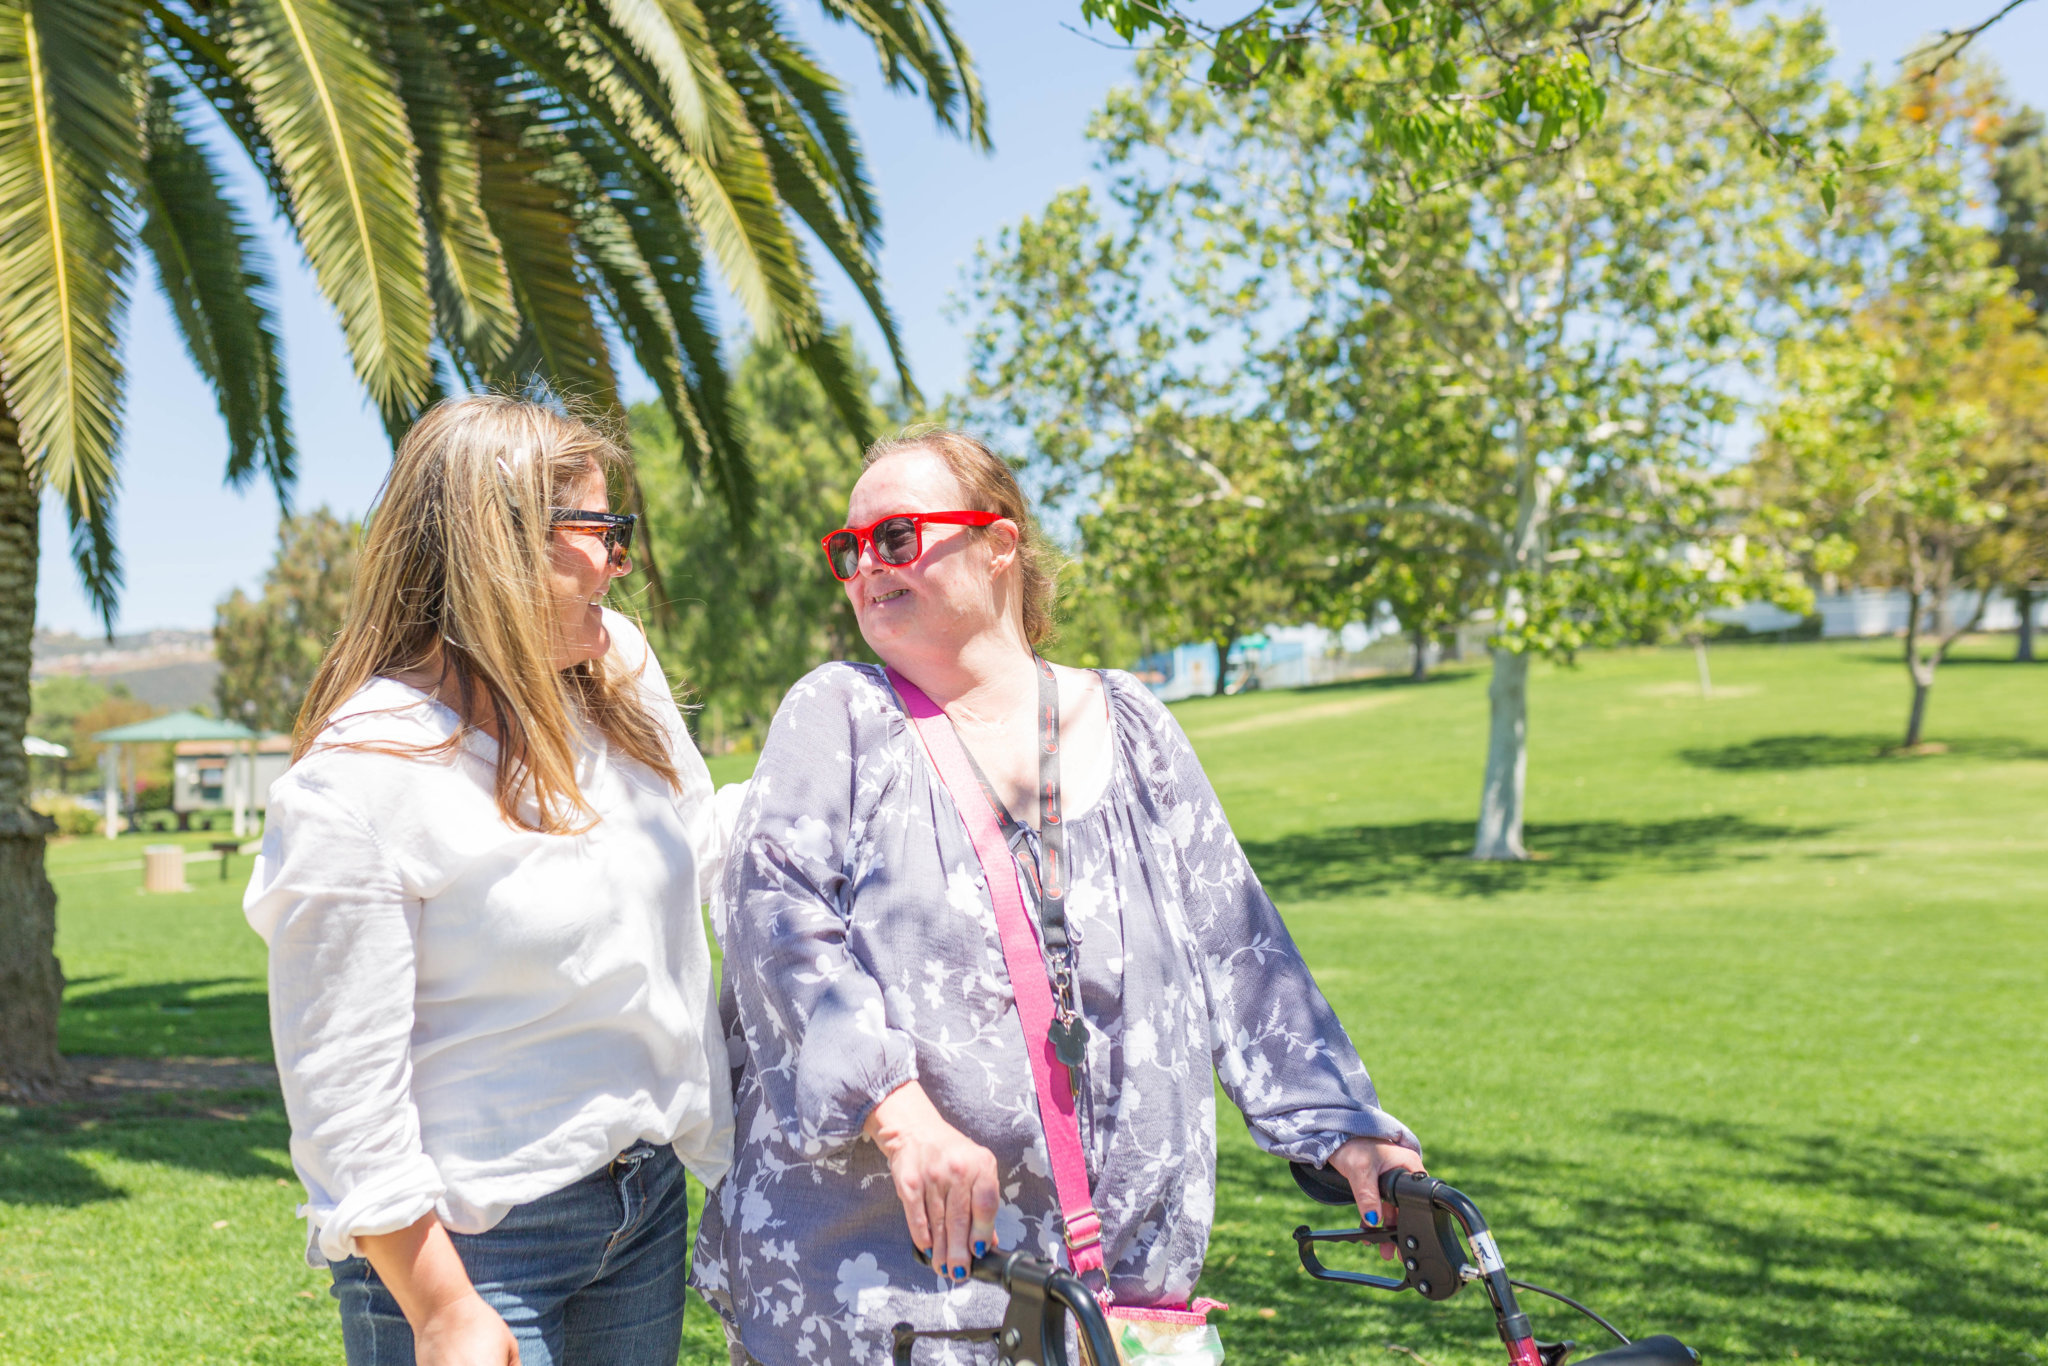 A caregiver and client walk next to each other outside in the park.